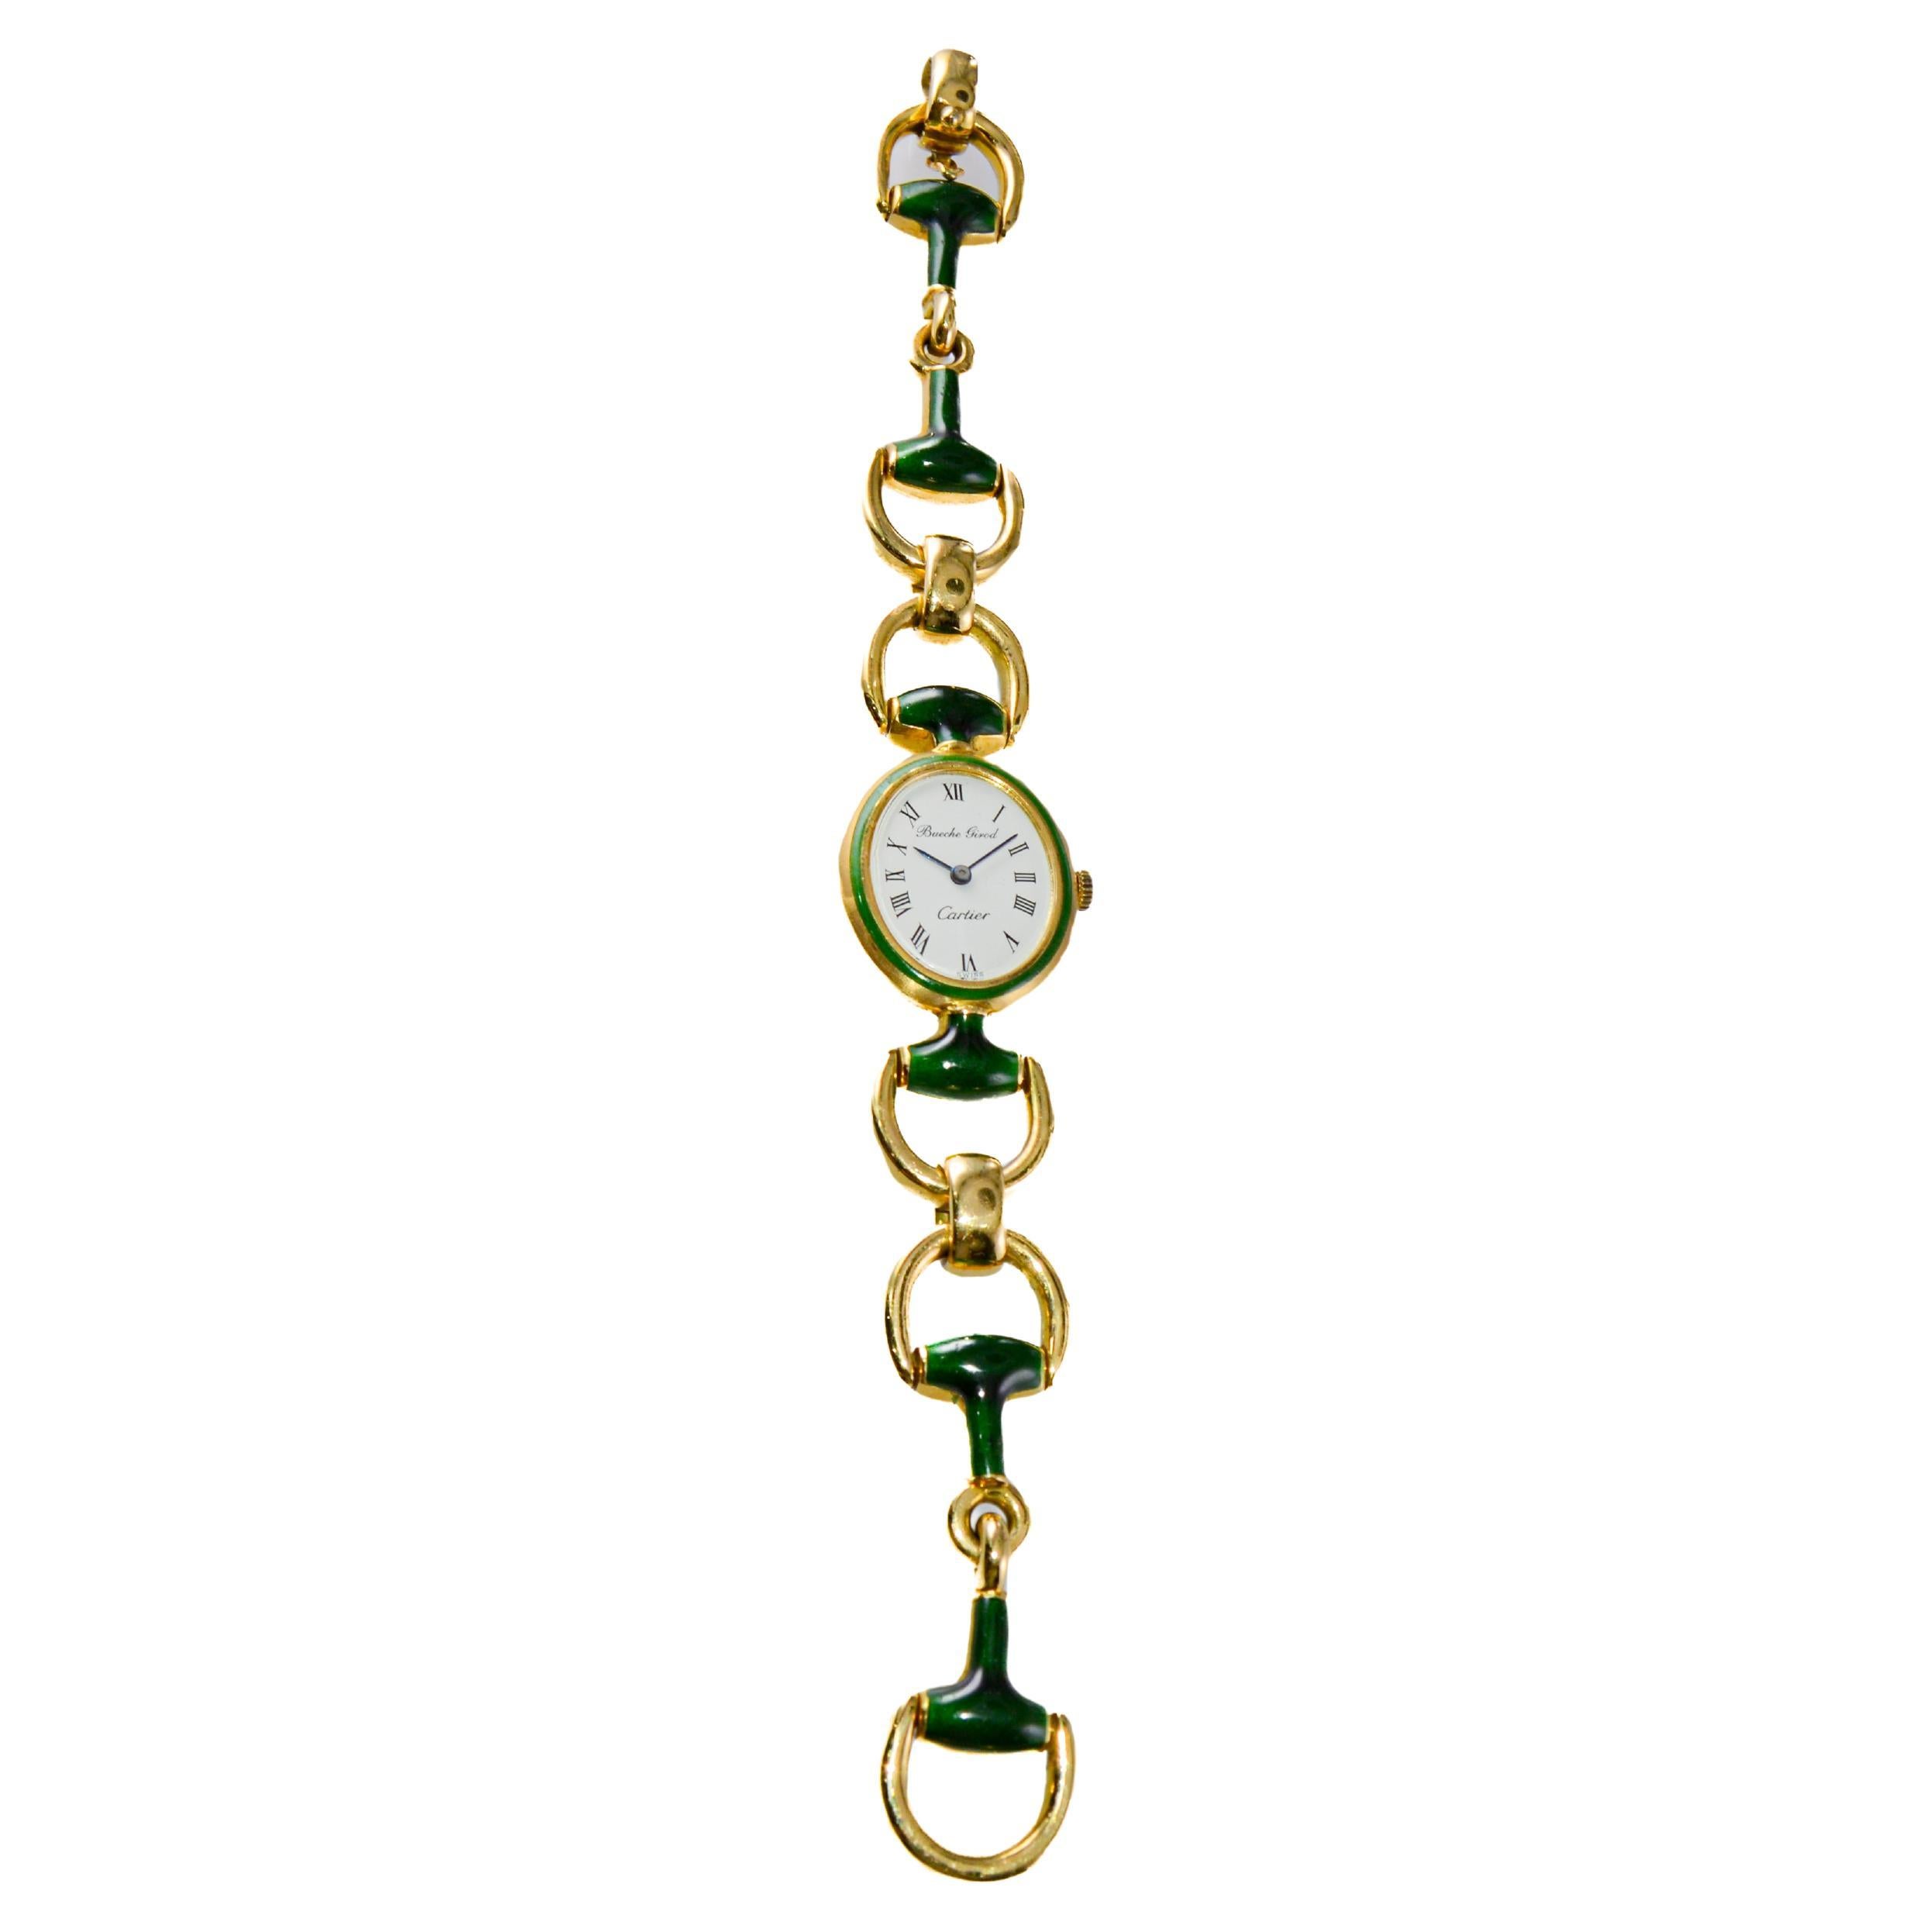 Modernist Cartier by Bueche Girod Yellow Gold Enamel Manual Wind Watch, circa 1970s For Sale